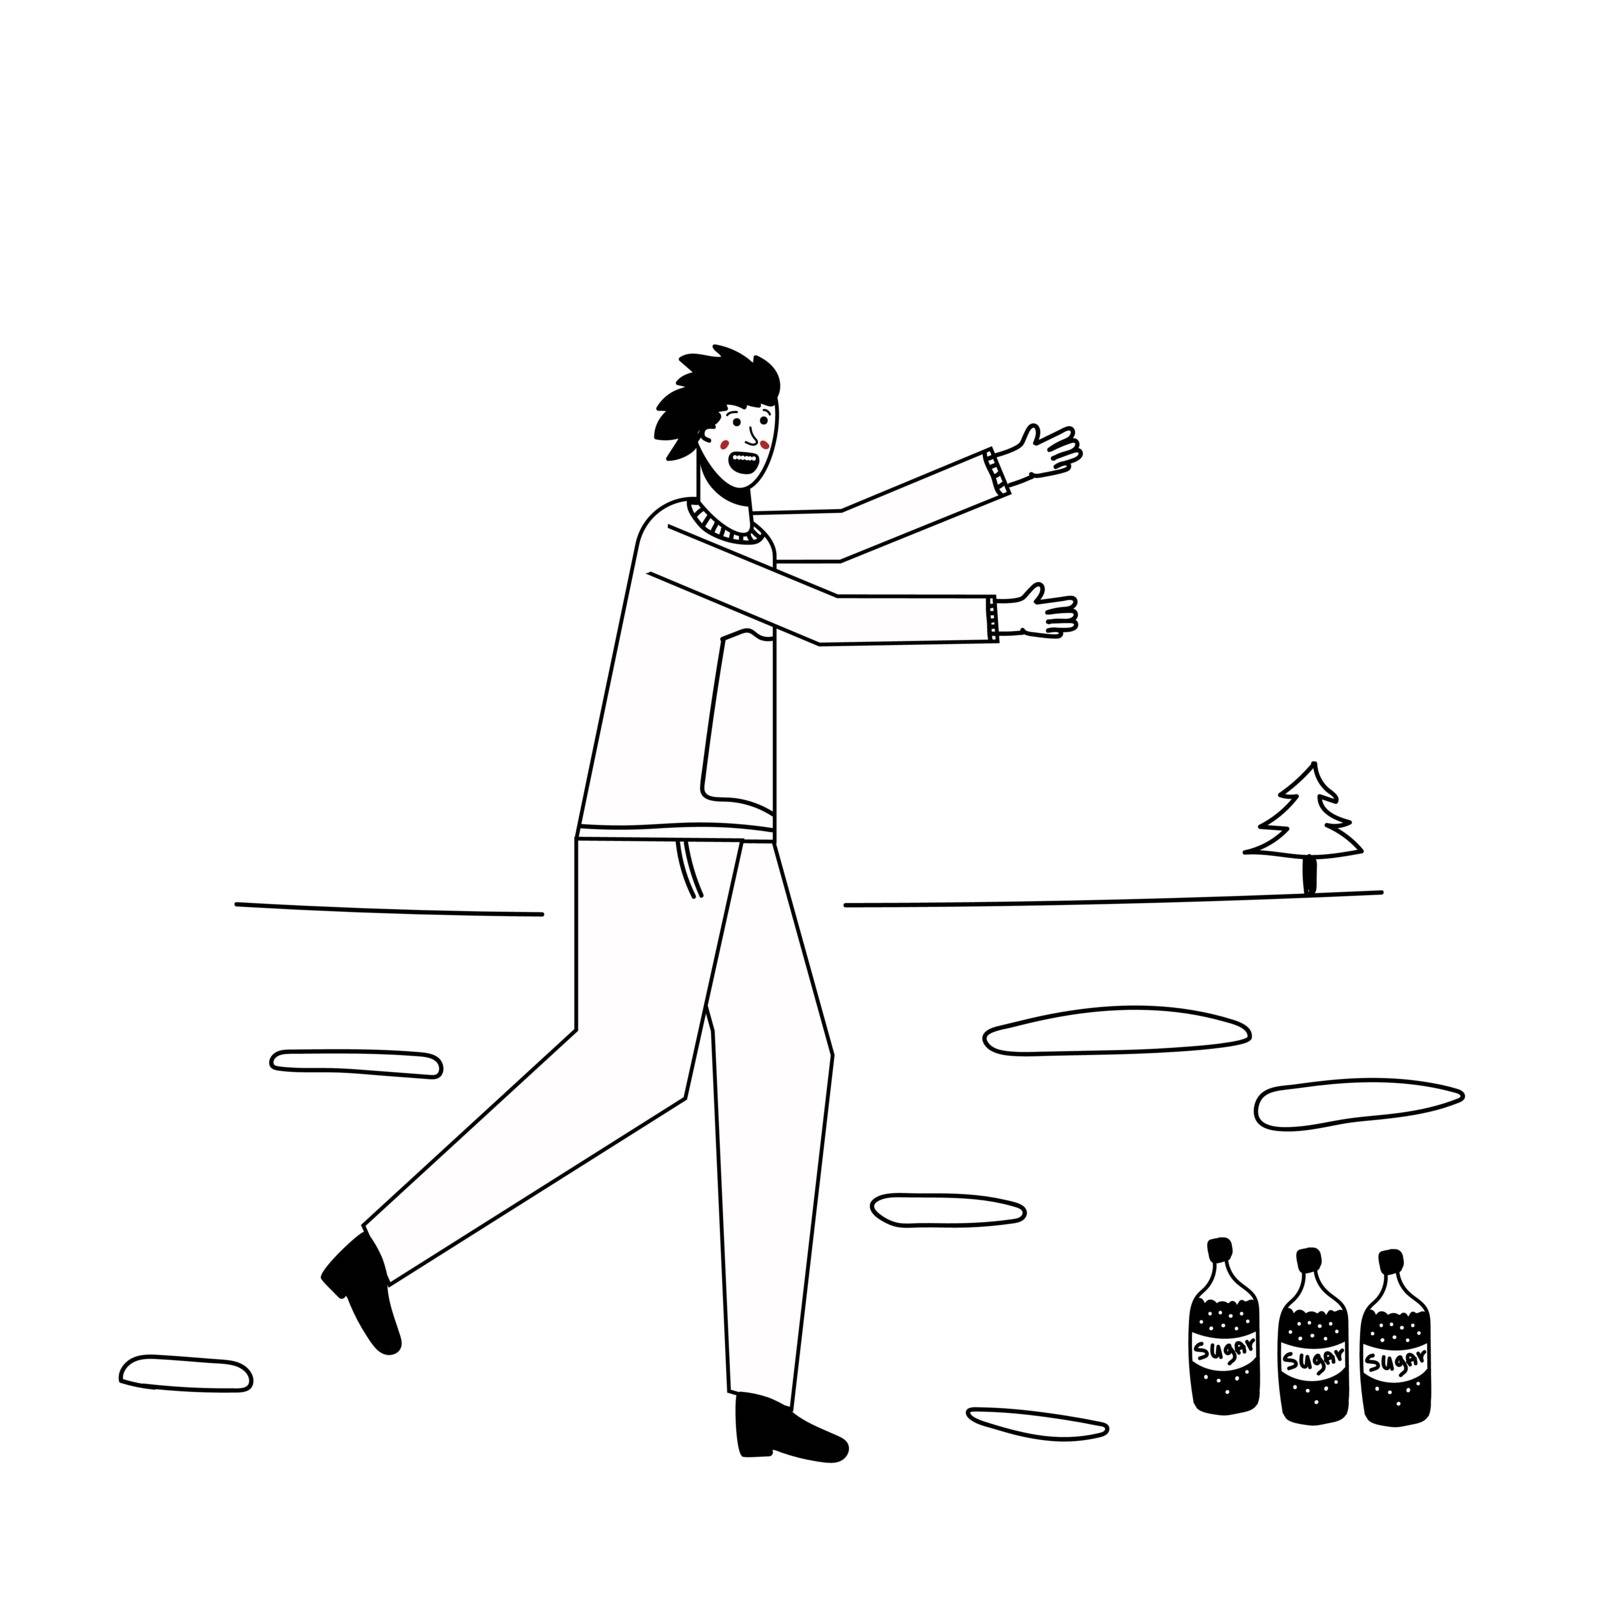 Soda addiction concept illustration. The man runs to the soda bottles. An unhealthy lifestyle, unhealthy diet, and a sweet tooth. Vector illustration. Lines